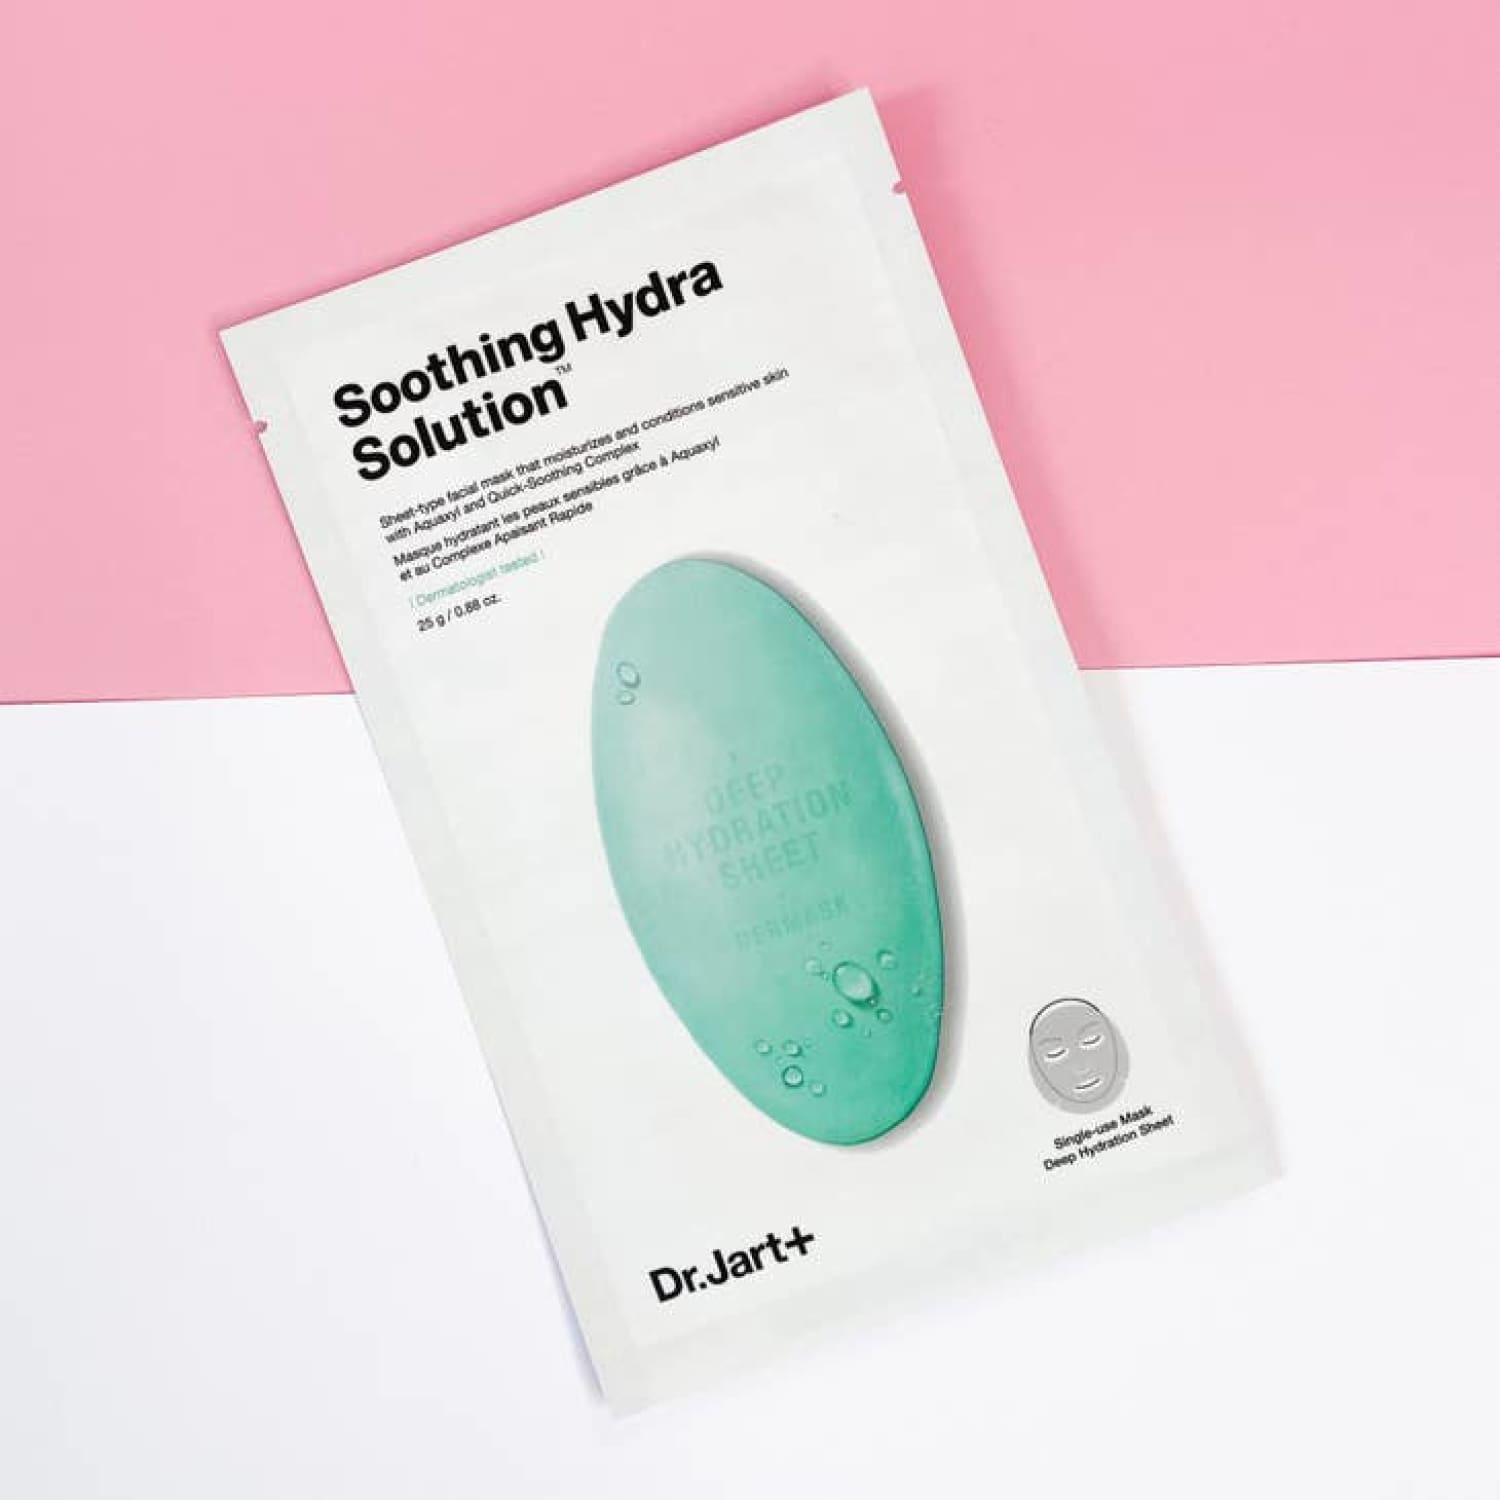 Dr. Jart+ Sheet Mask - Soothing Hydra Solution Beauty - Dr